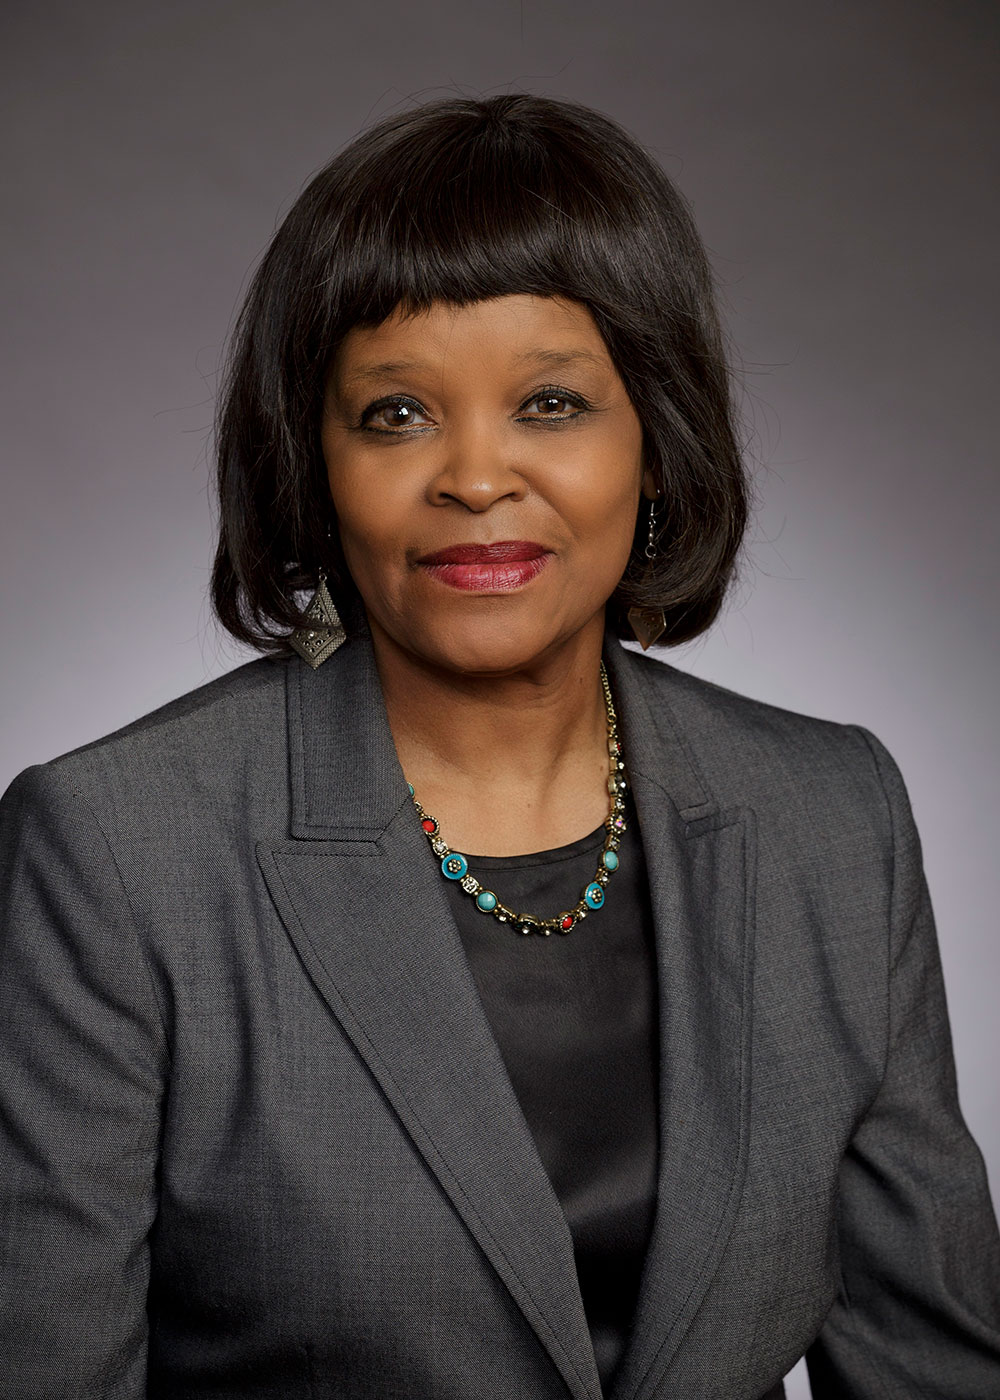 Dr. Bernadine Duncan, Director of Student Counseling Services